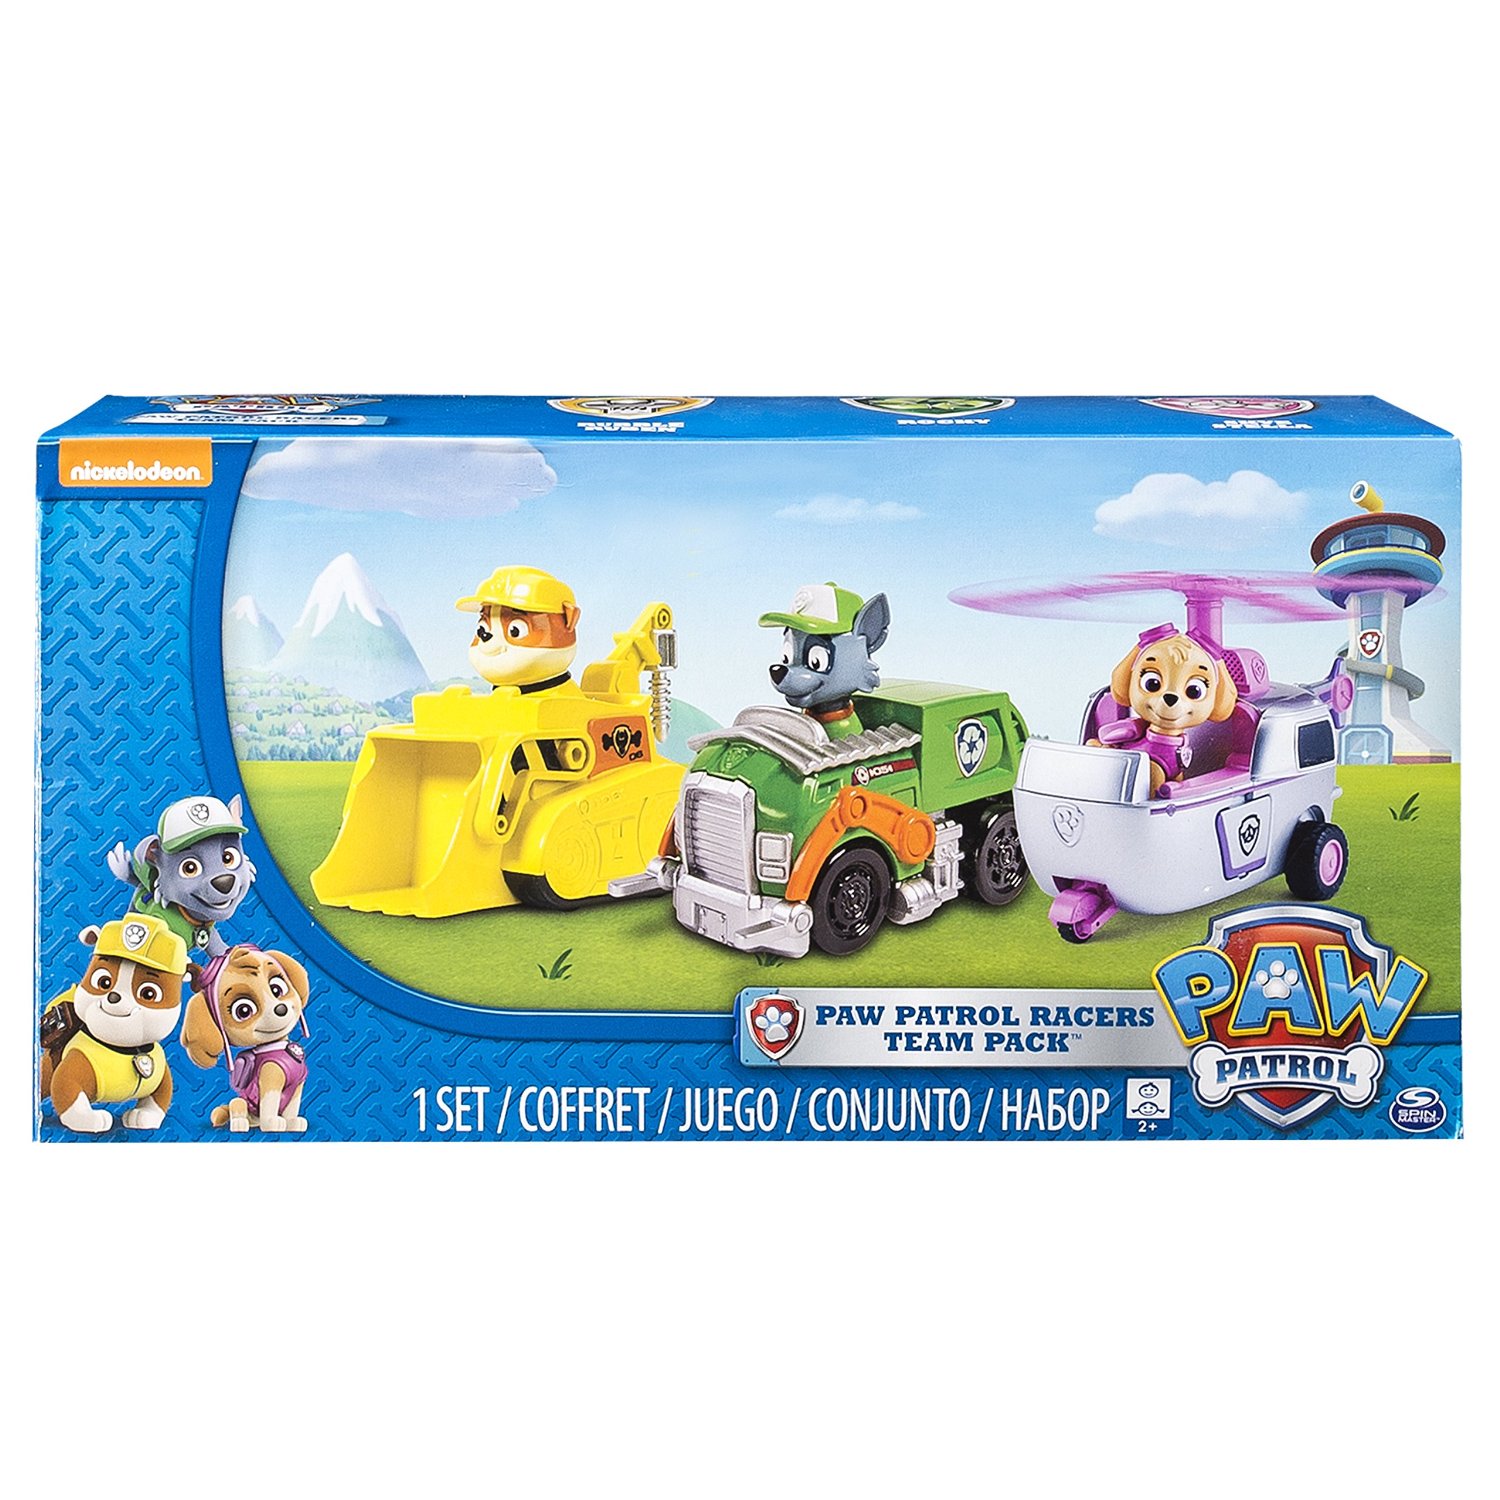 Paw Patrol Racers 3-Pack Vehicle Set Only $13.49!